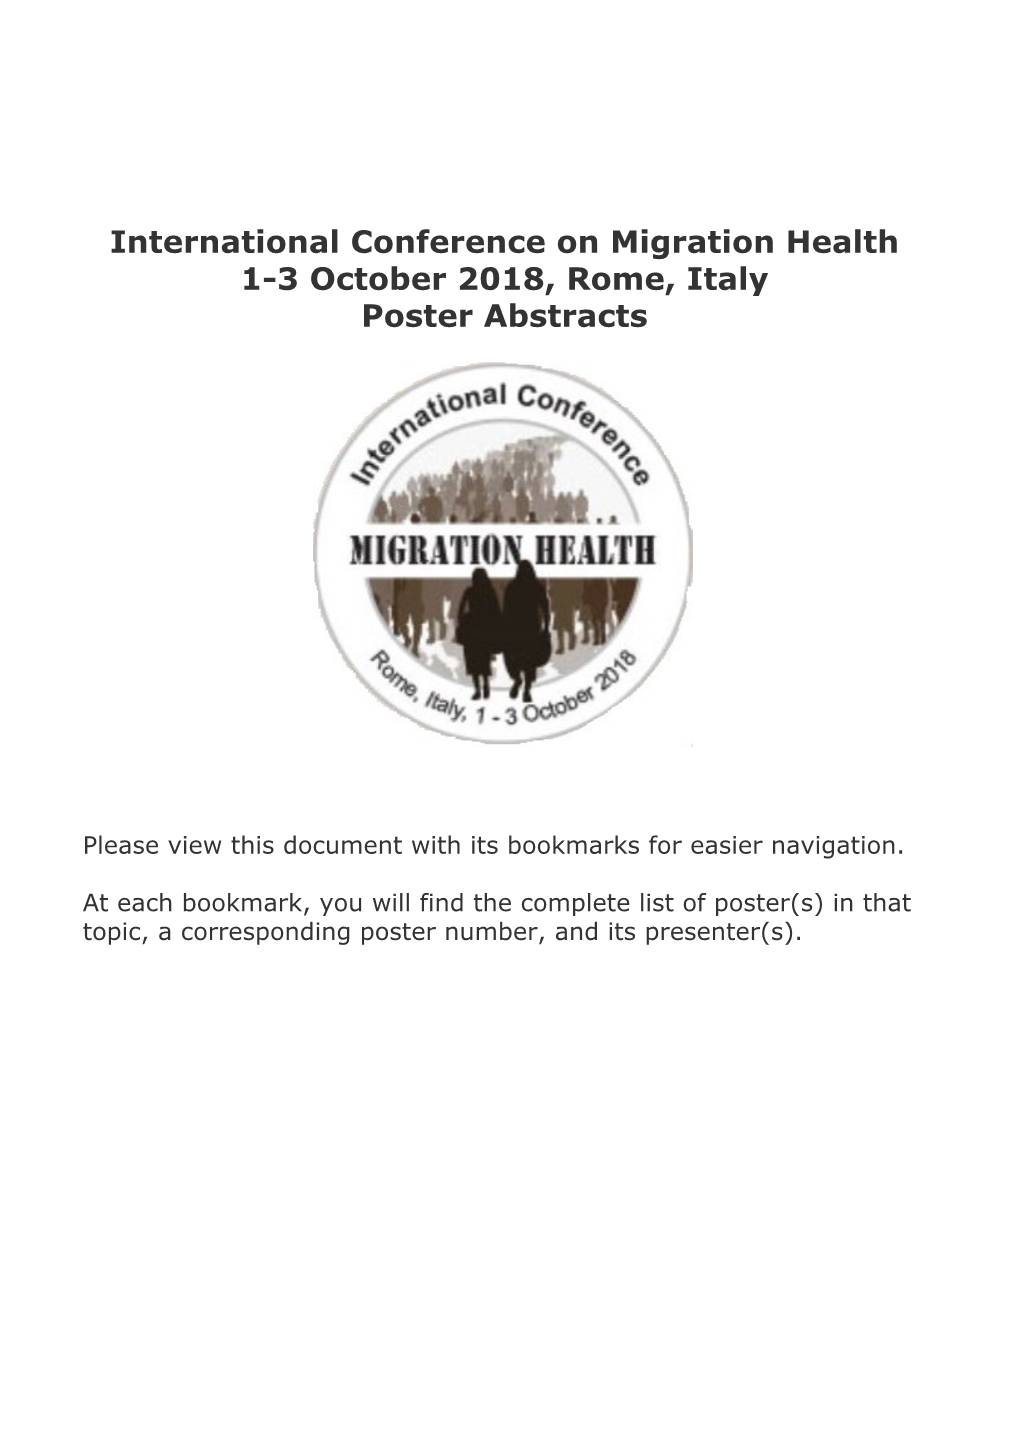 International Conference on Migration Health 1-3 October 2018, Rome, Italy Poster Abstracts